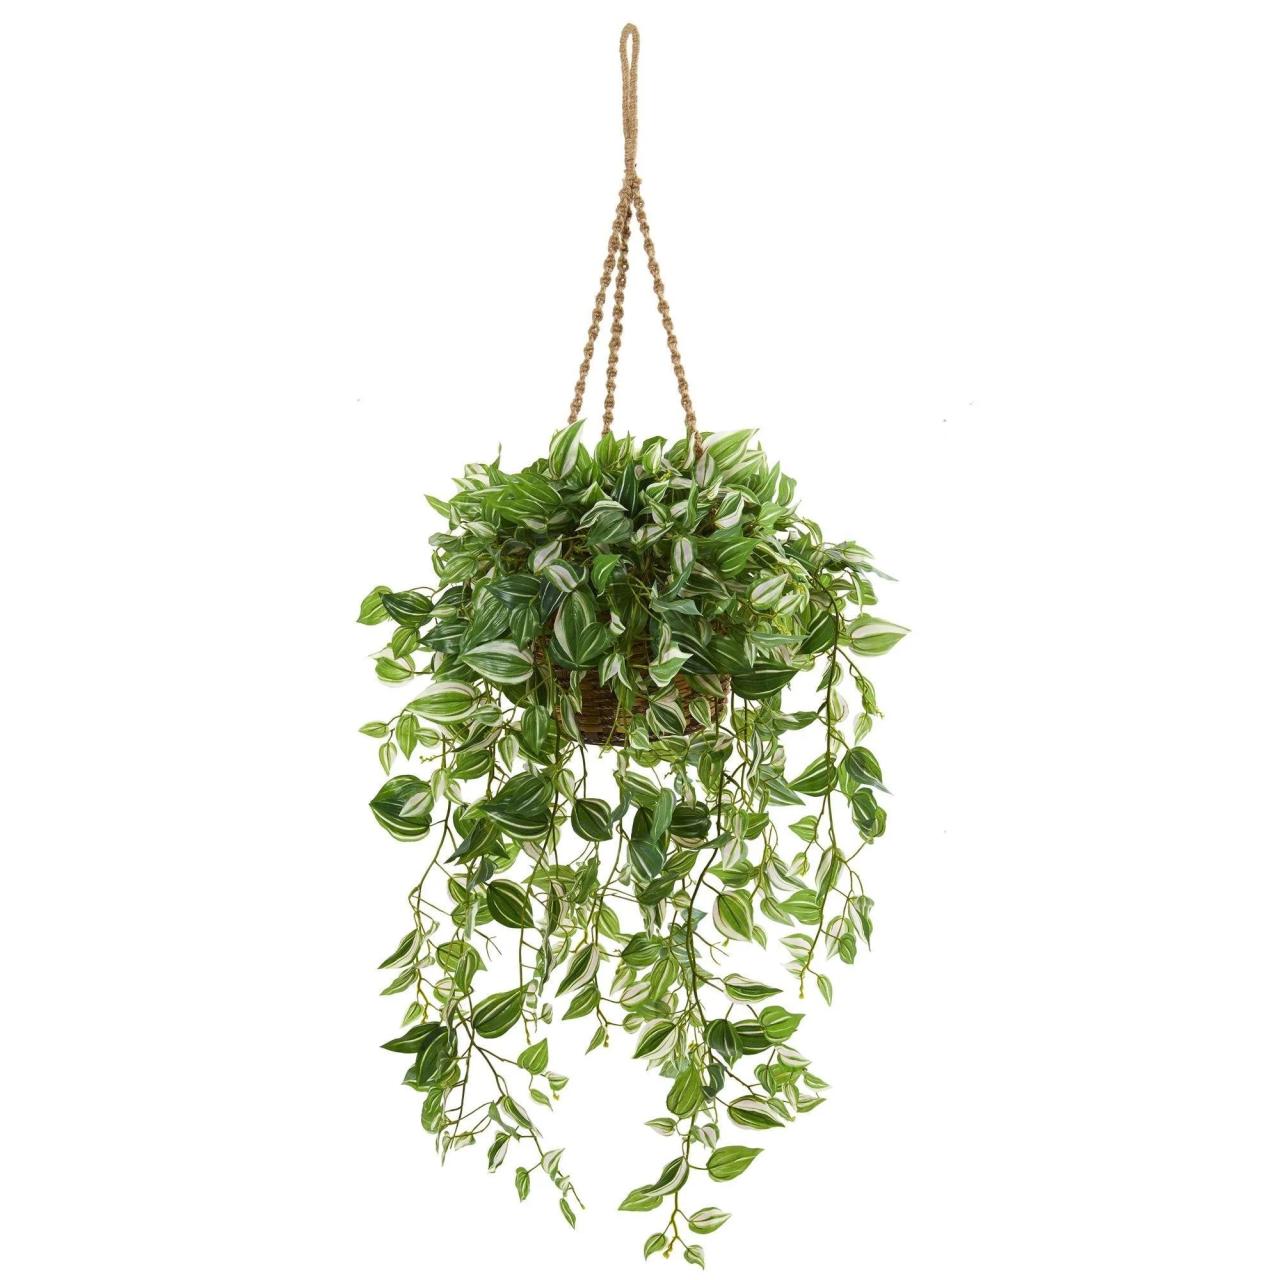 Hanging Plants Indoor | Hanging Plants for Home: A Guide to Greenery and Style